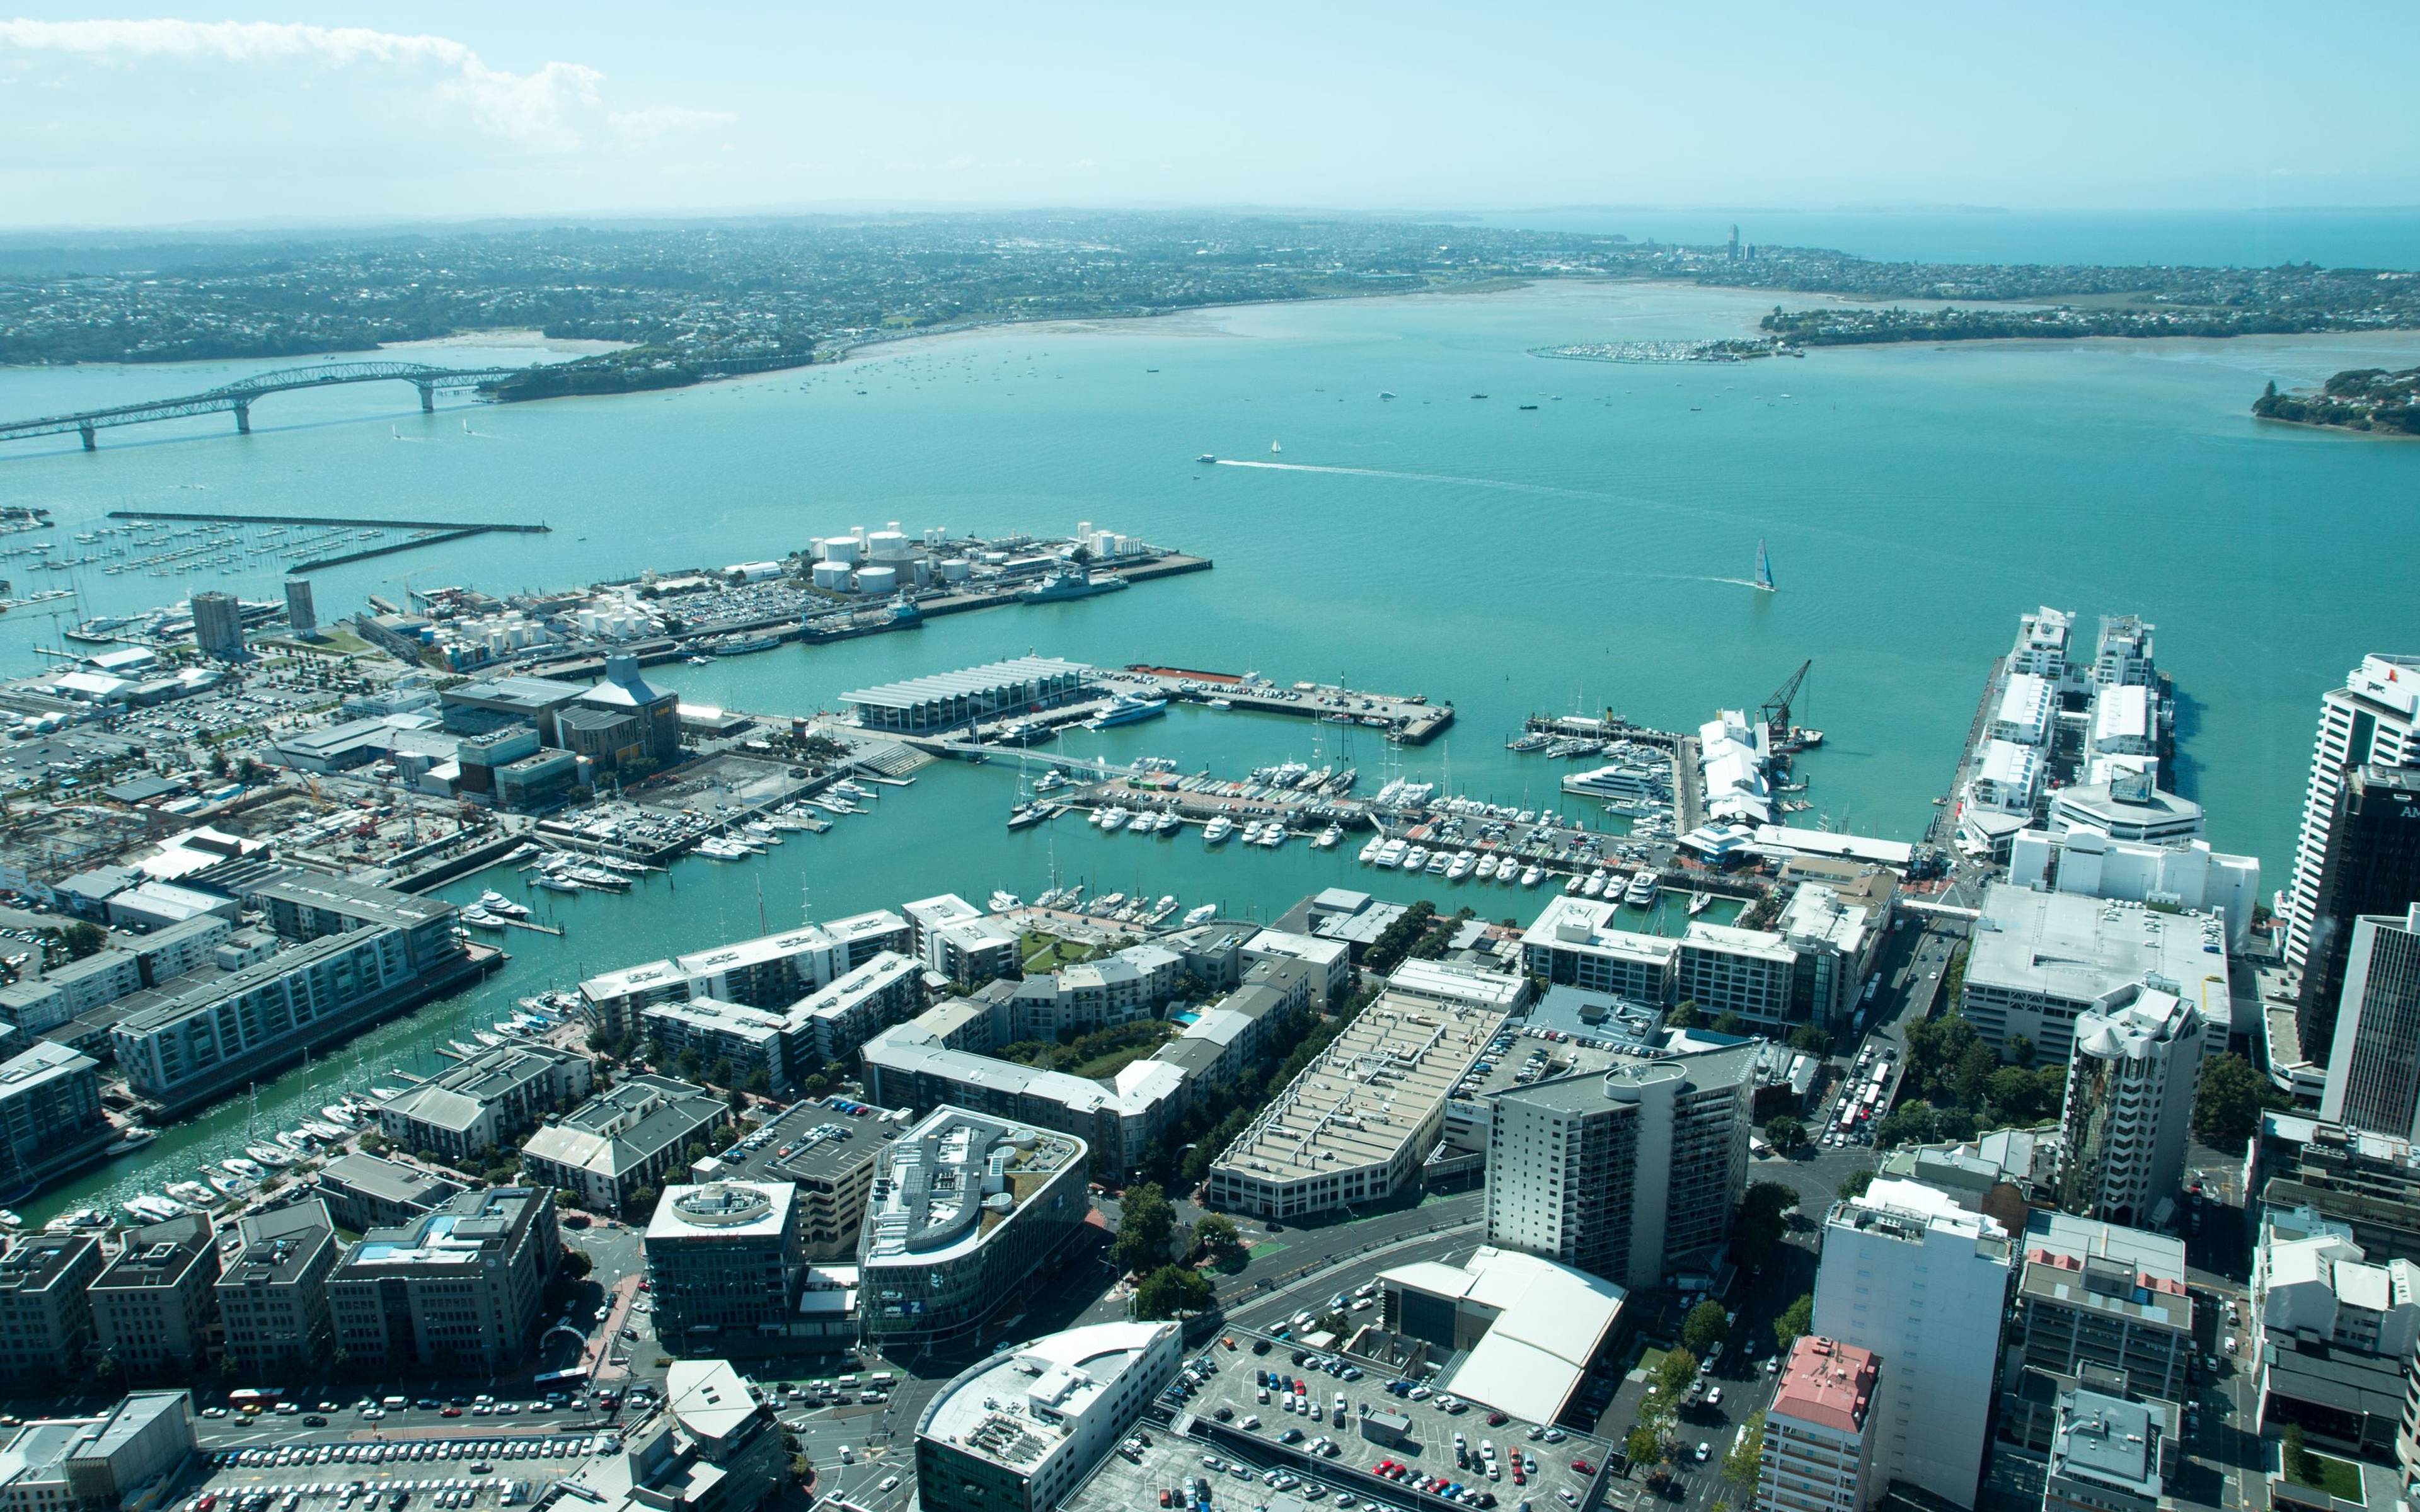 Auckland - "The City of Sails"